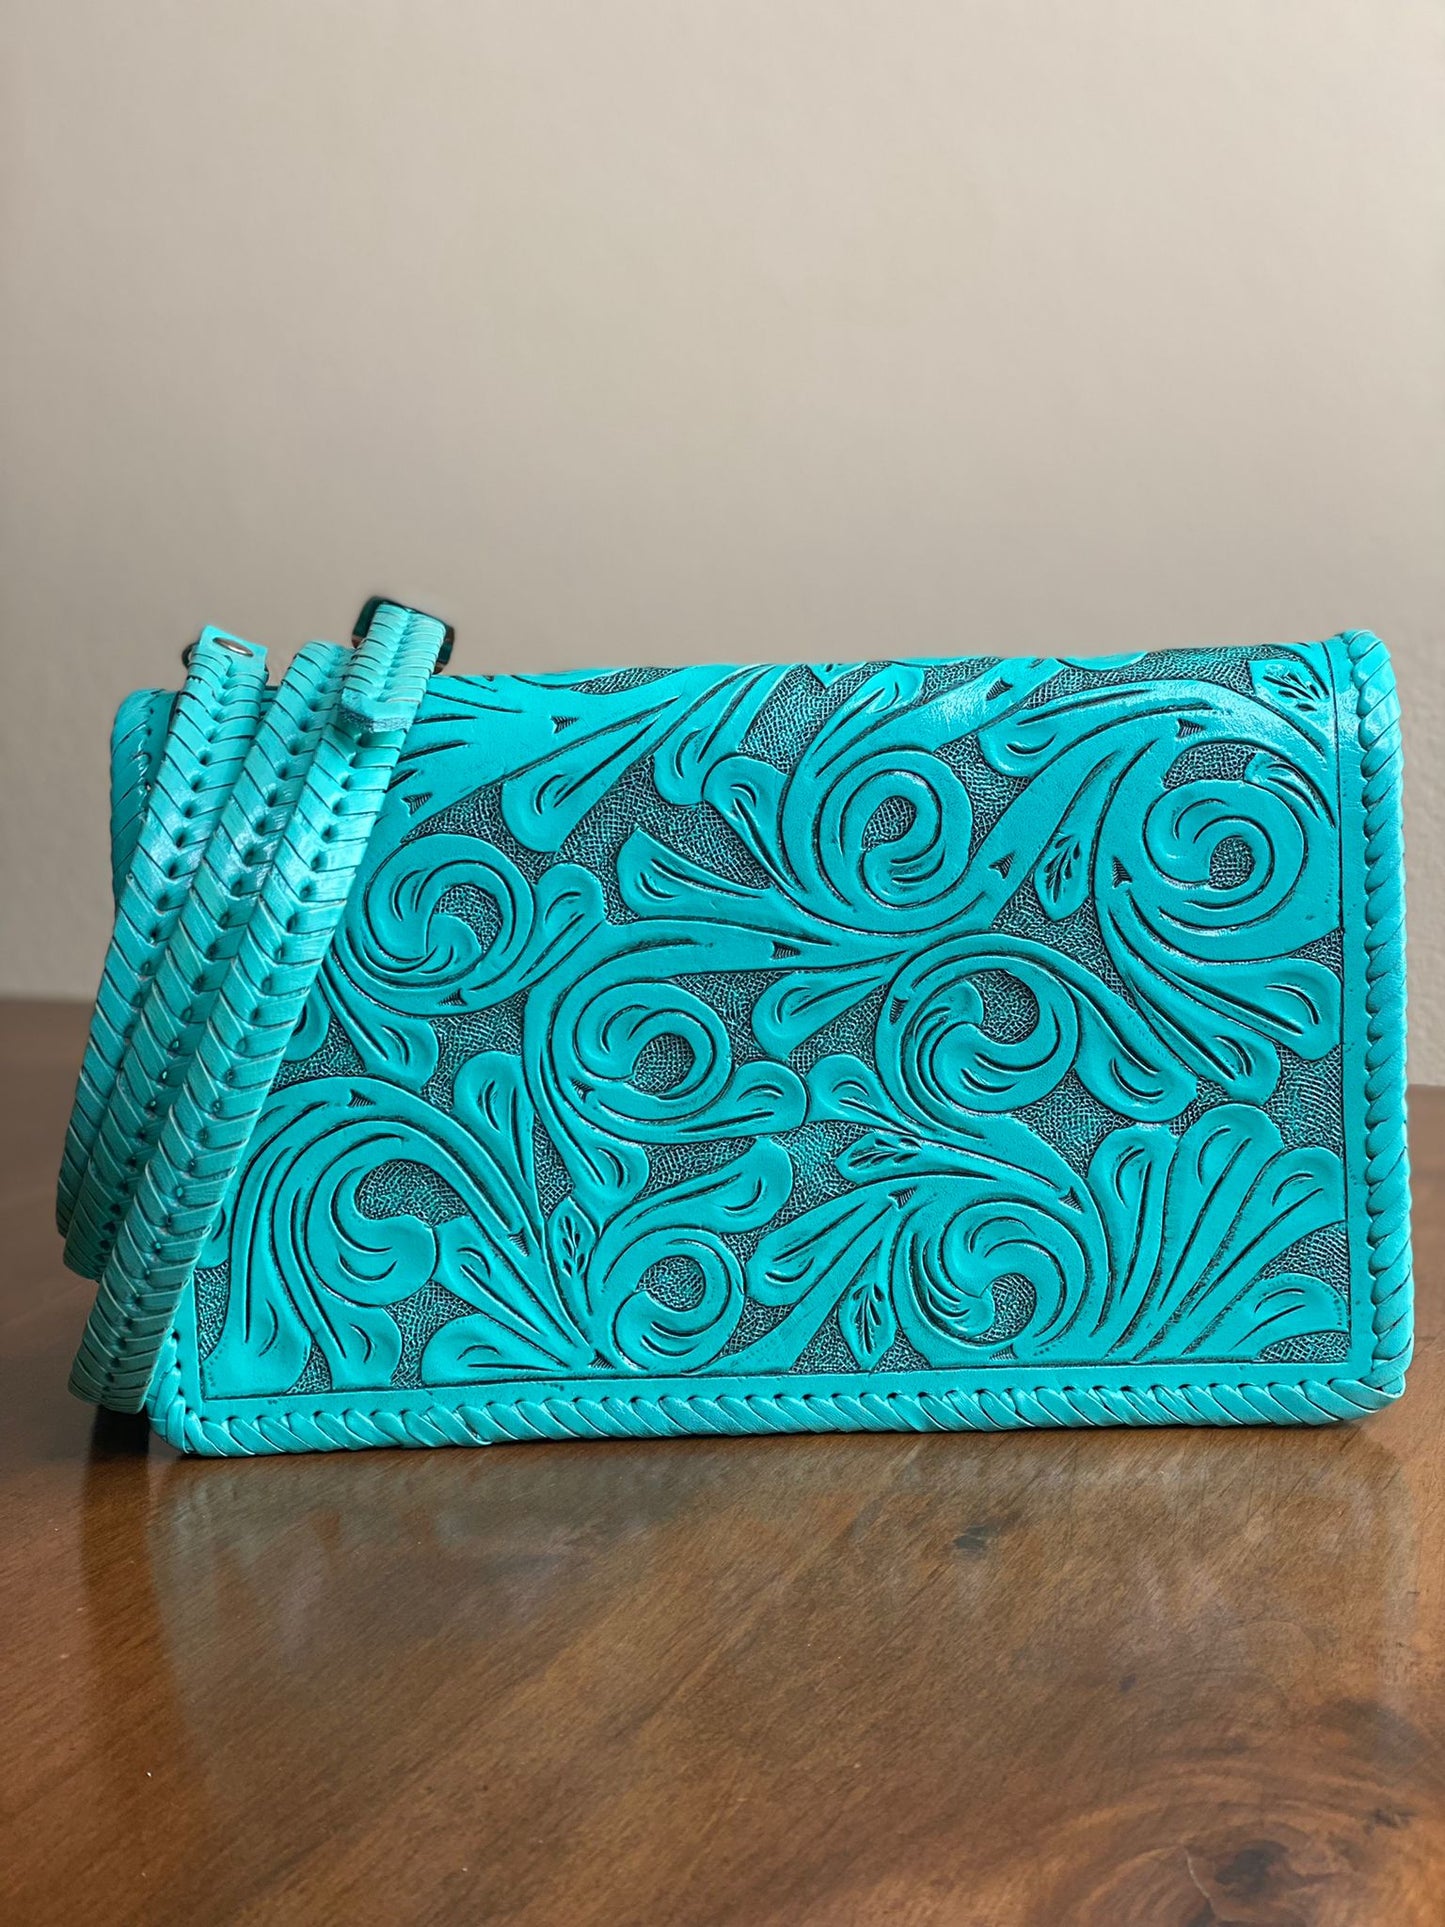 Turquoise Leather Clutch